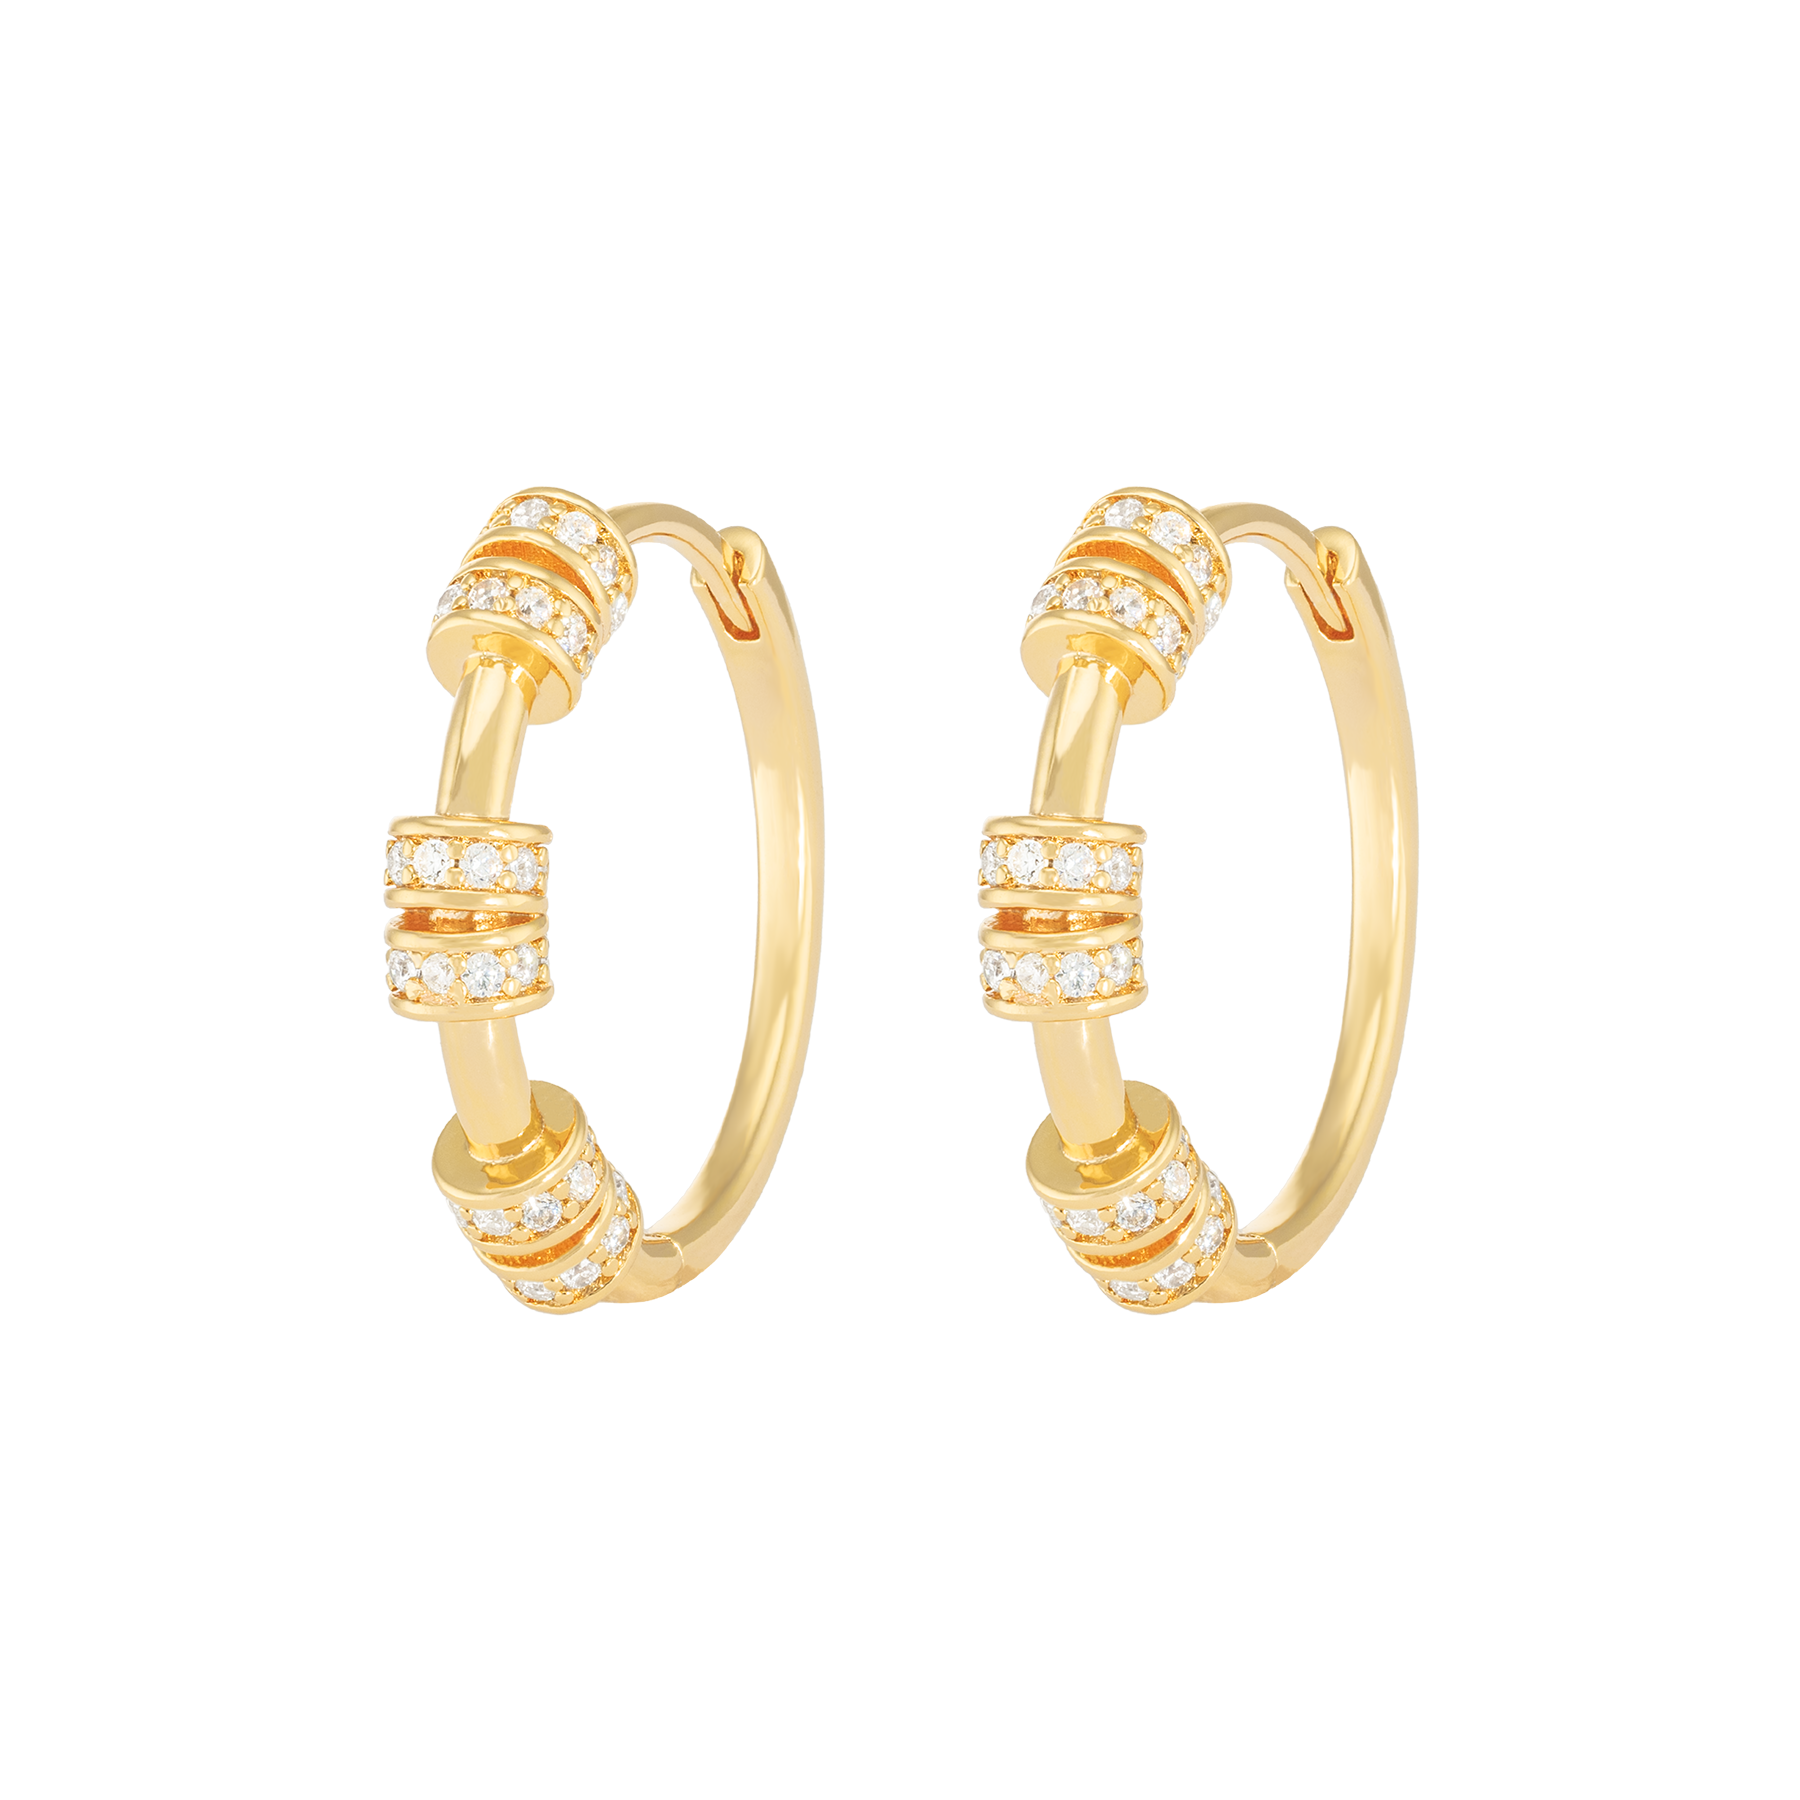 Image of Pile & Gold hoops from Emilia by Bon Dep